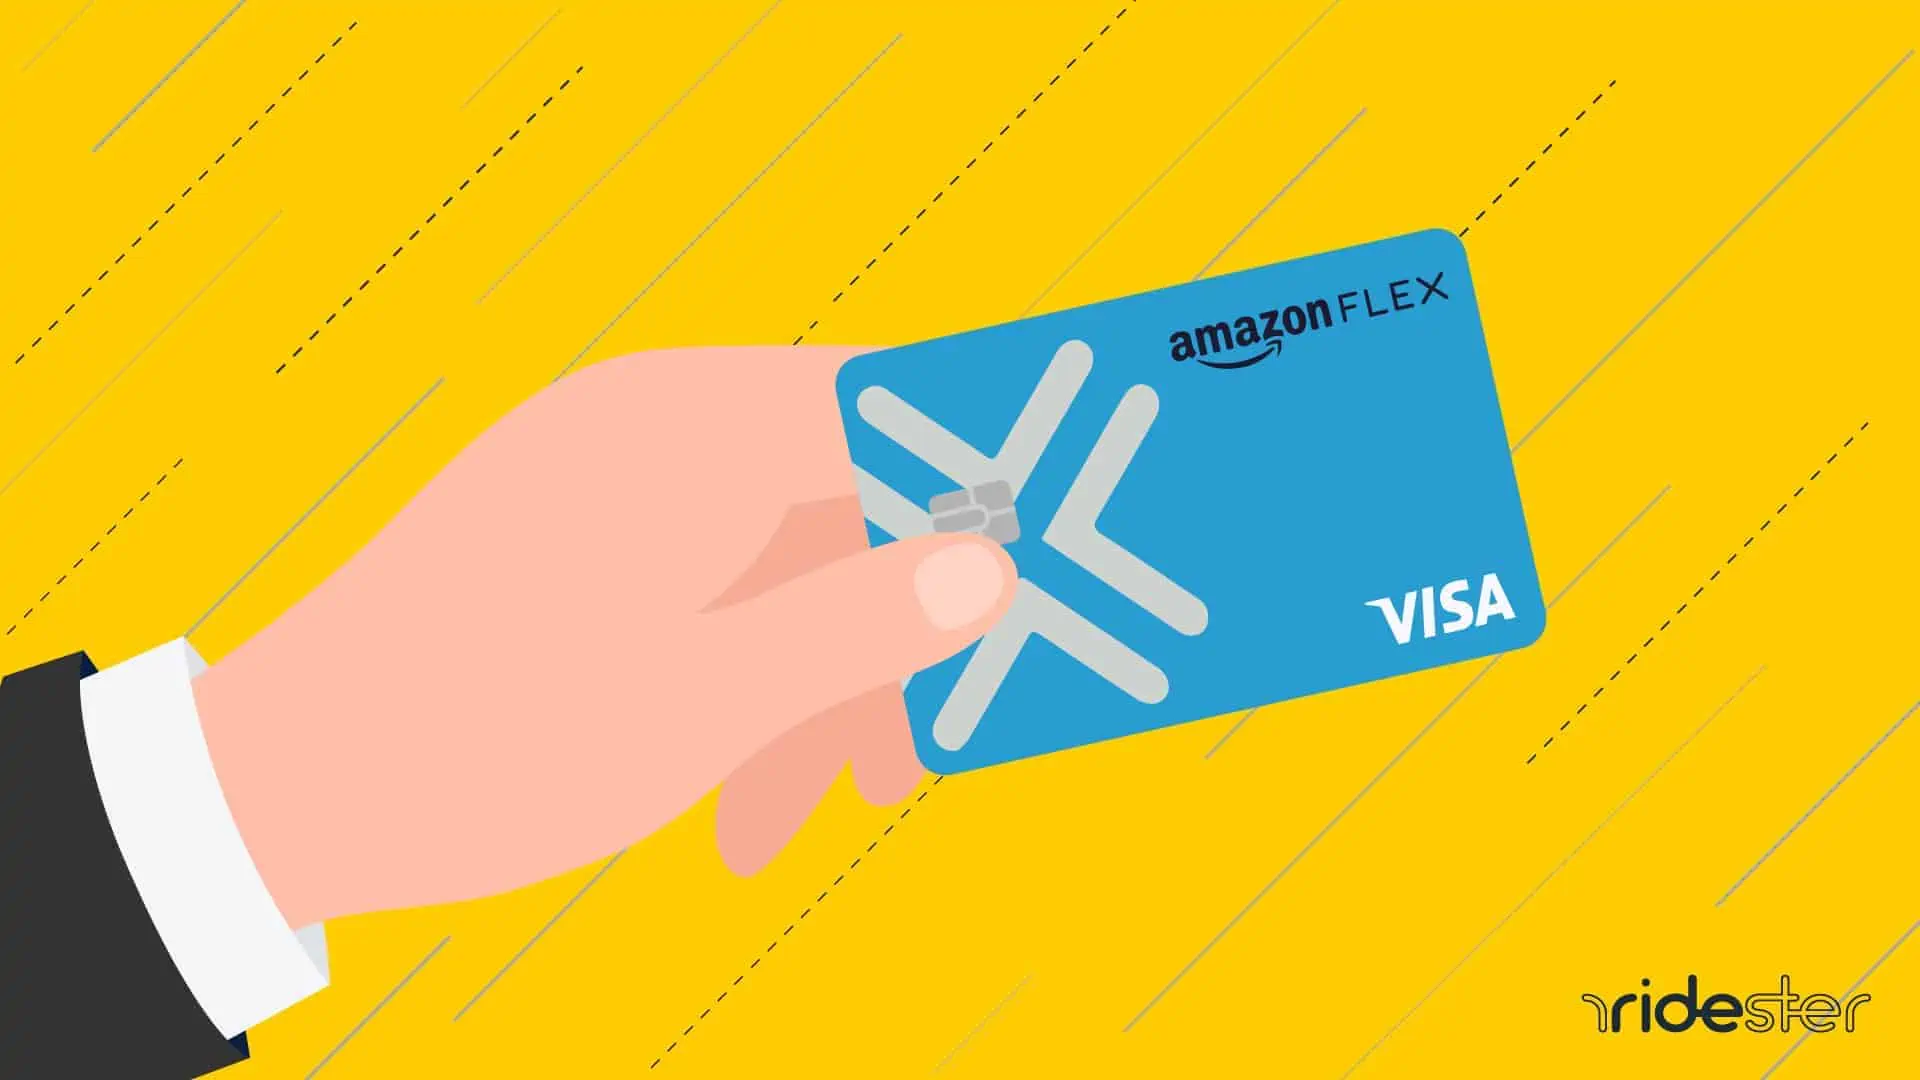 vector graphic showing an amazon flex debit card in somebody's hand